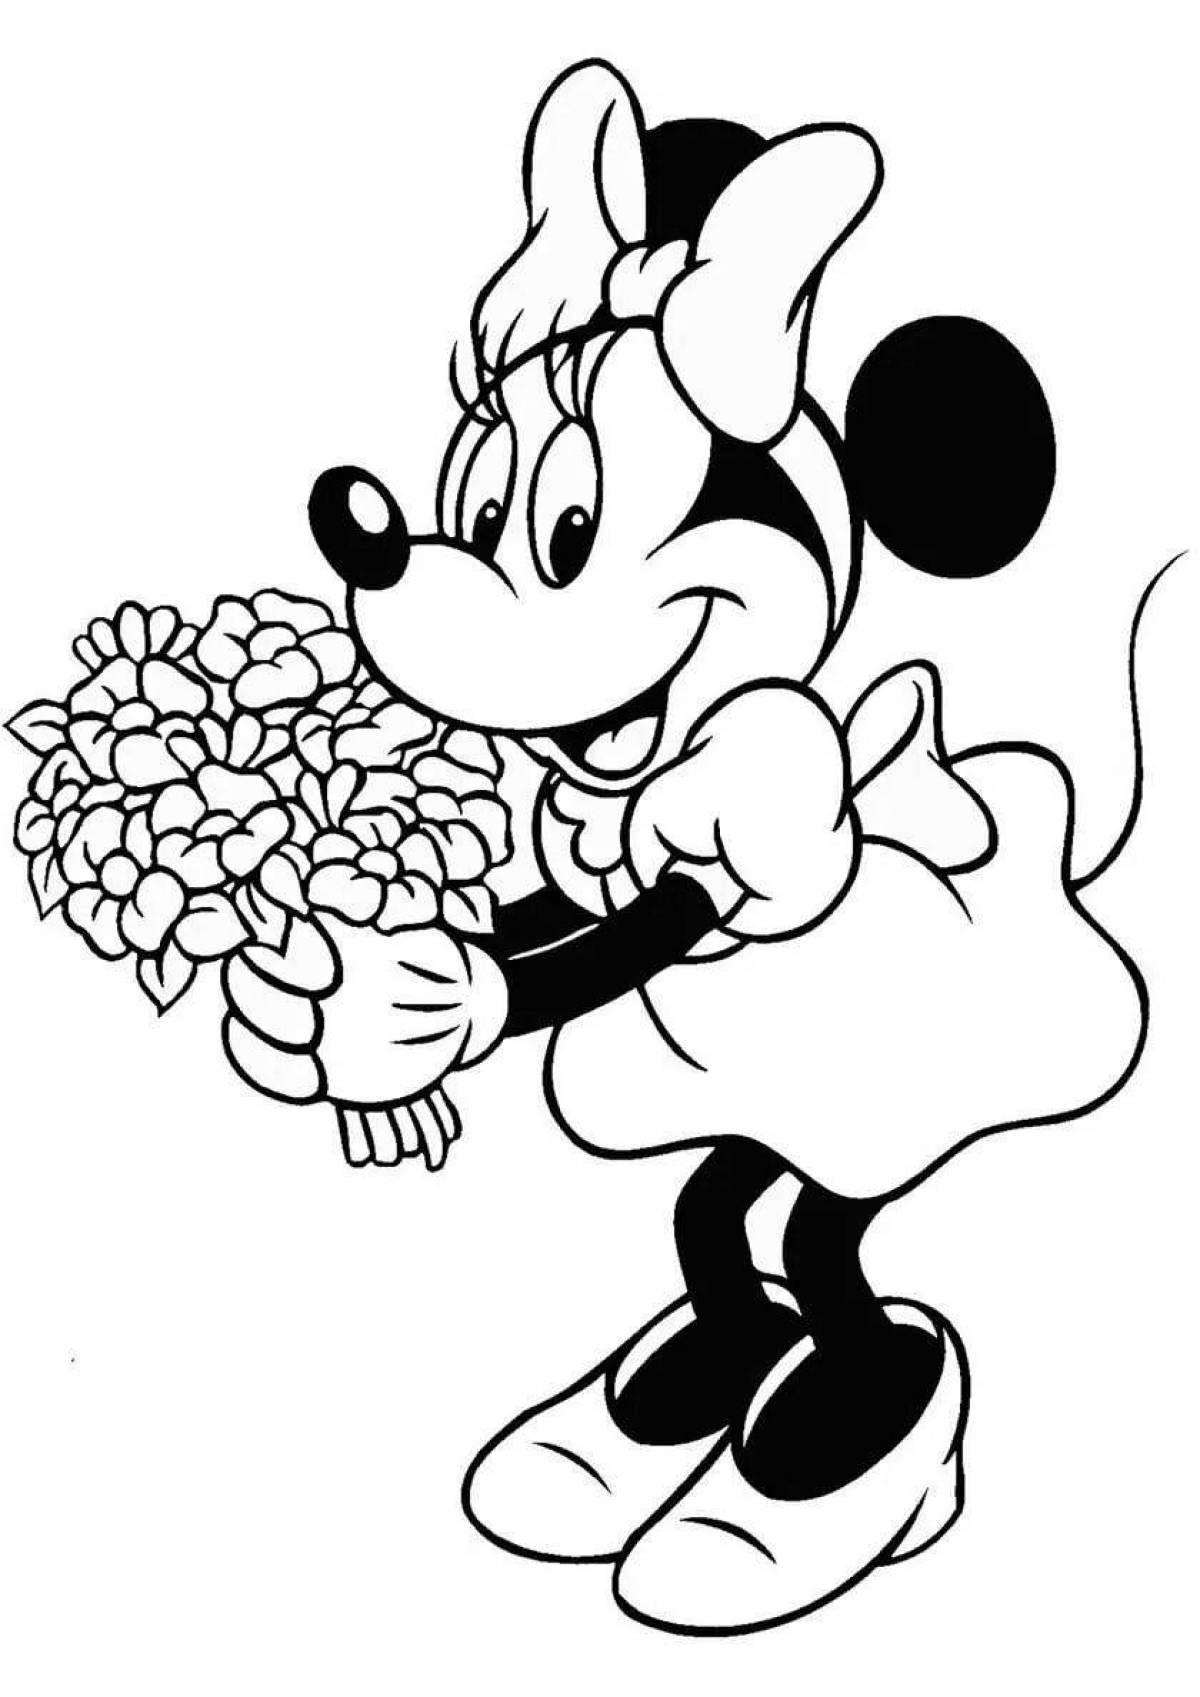 Mickey mouse playful coloring book for kids